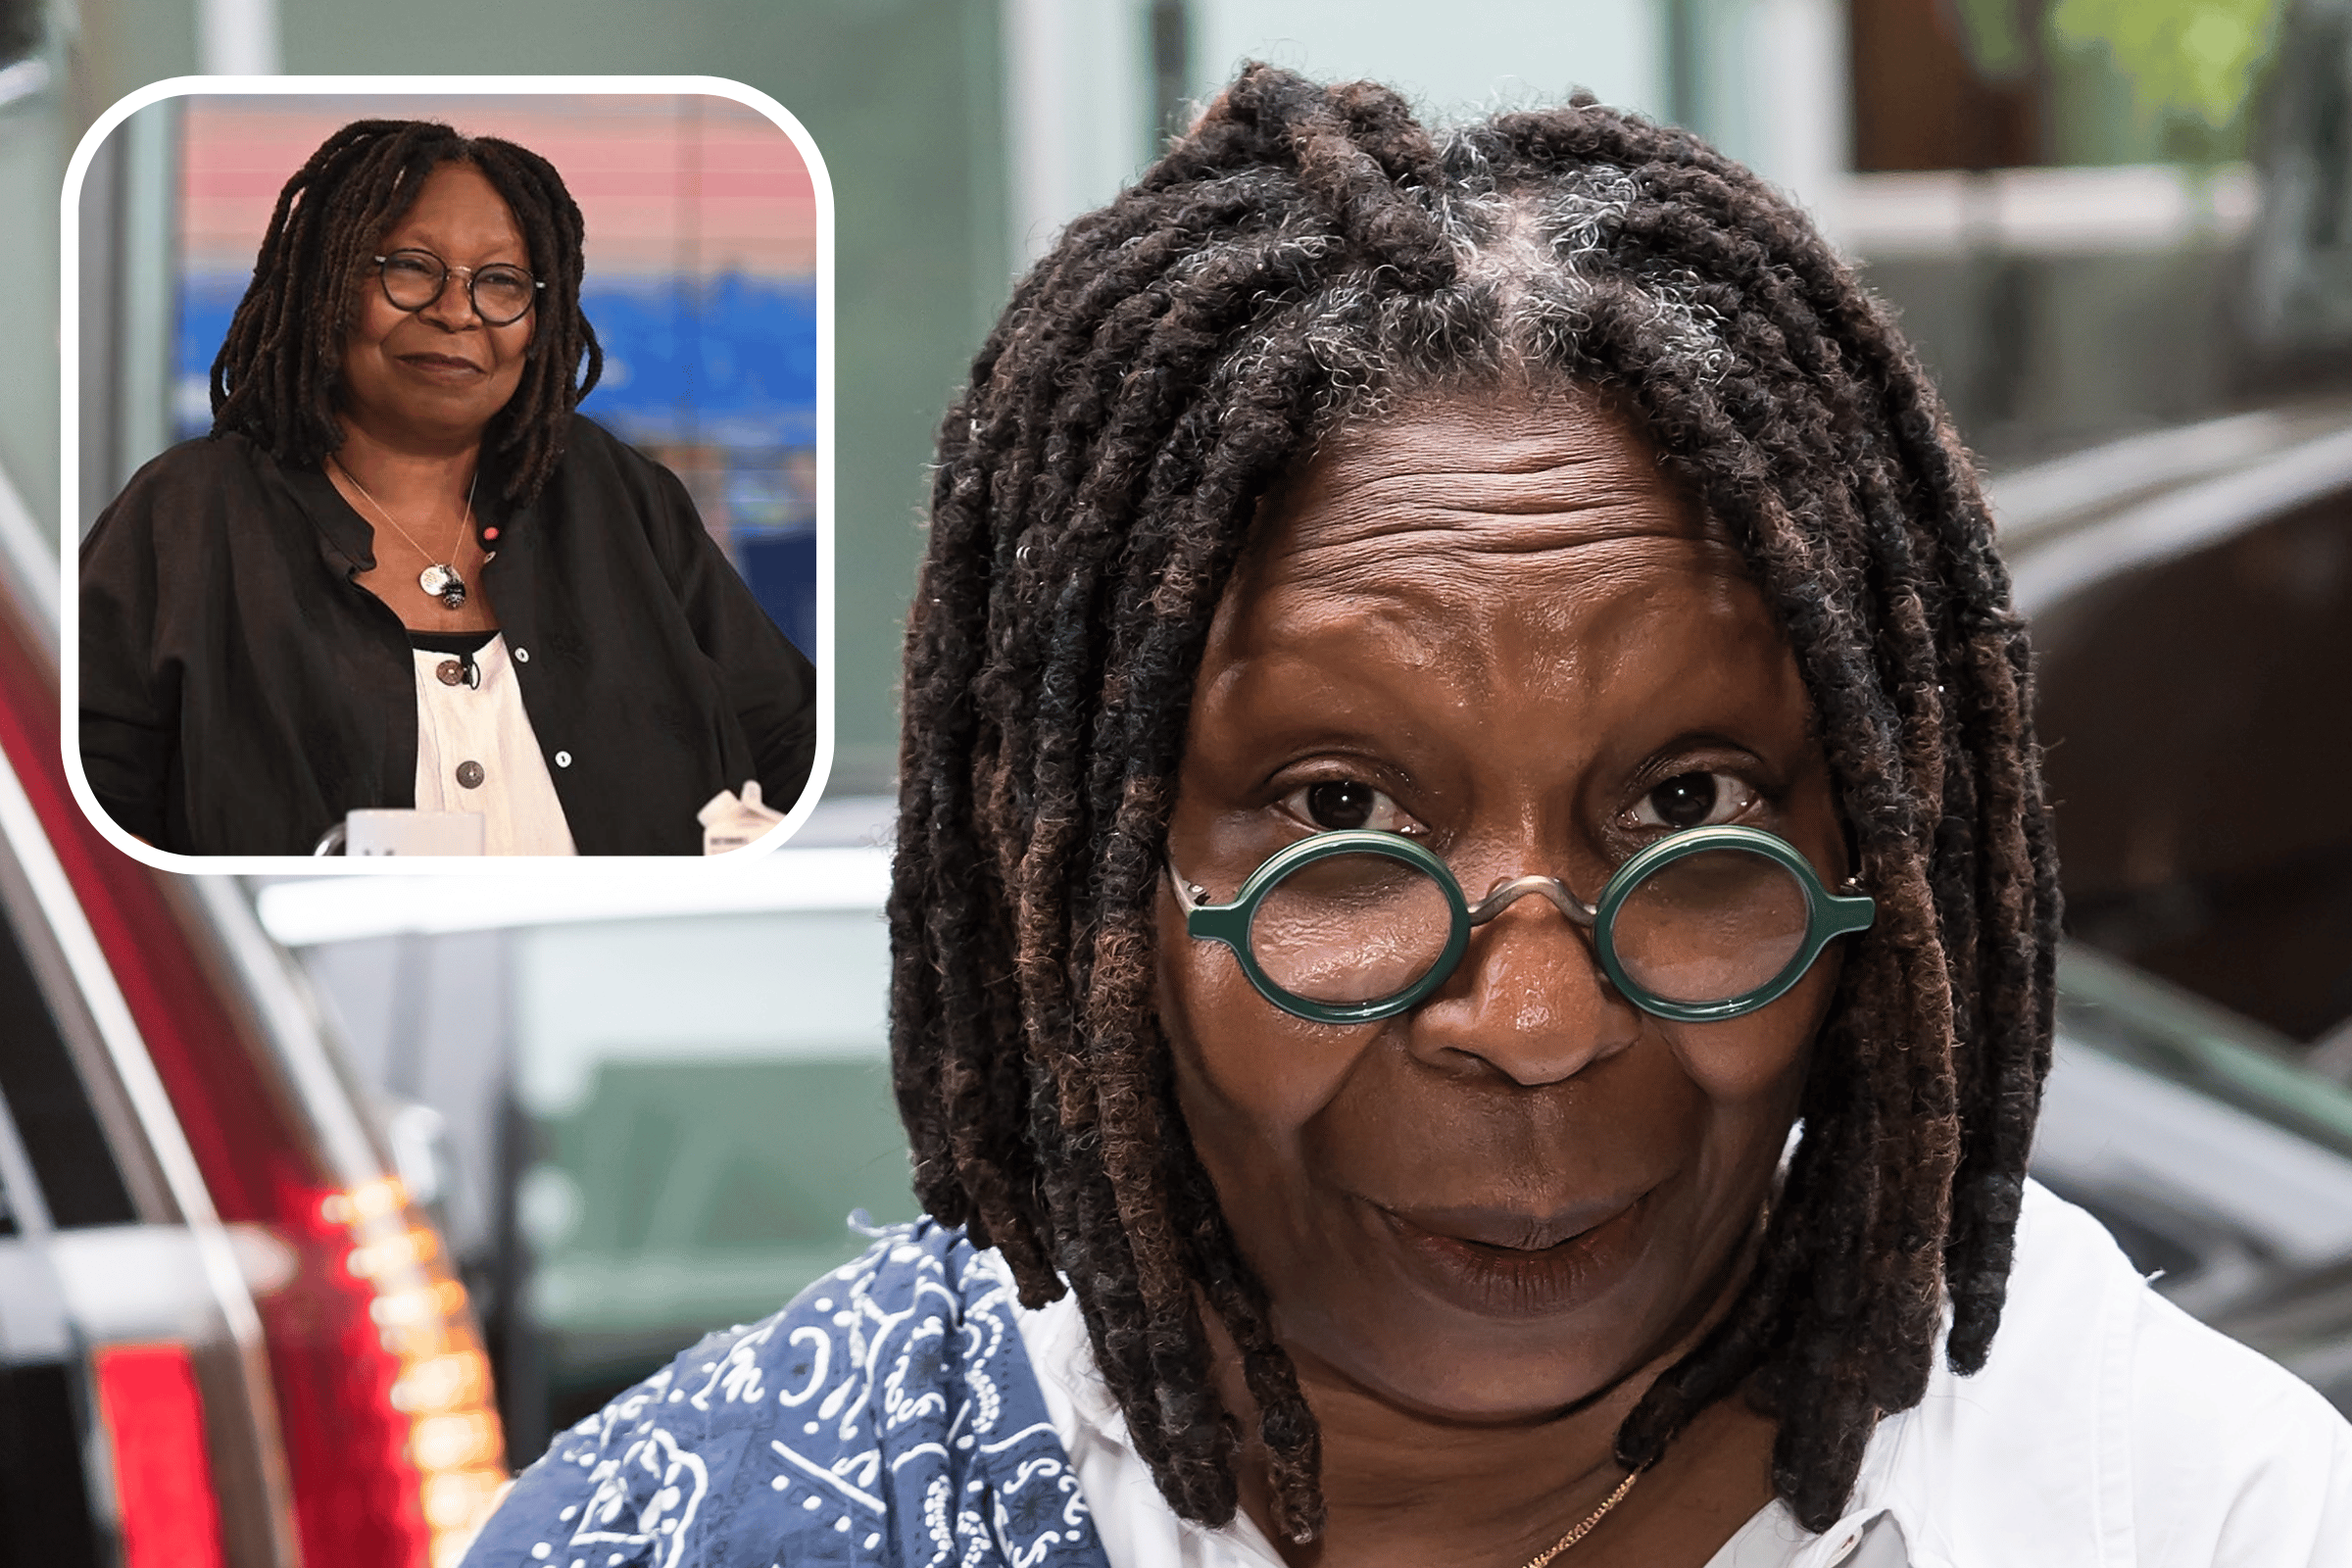 What Did Whoopi Goldberg Say About Holocaust? Host Doubles Down